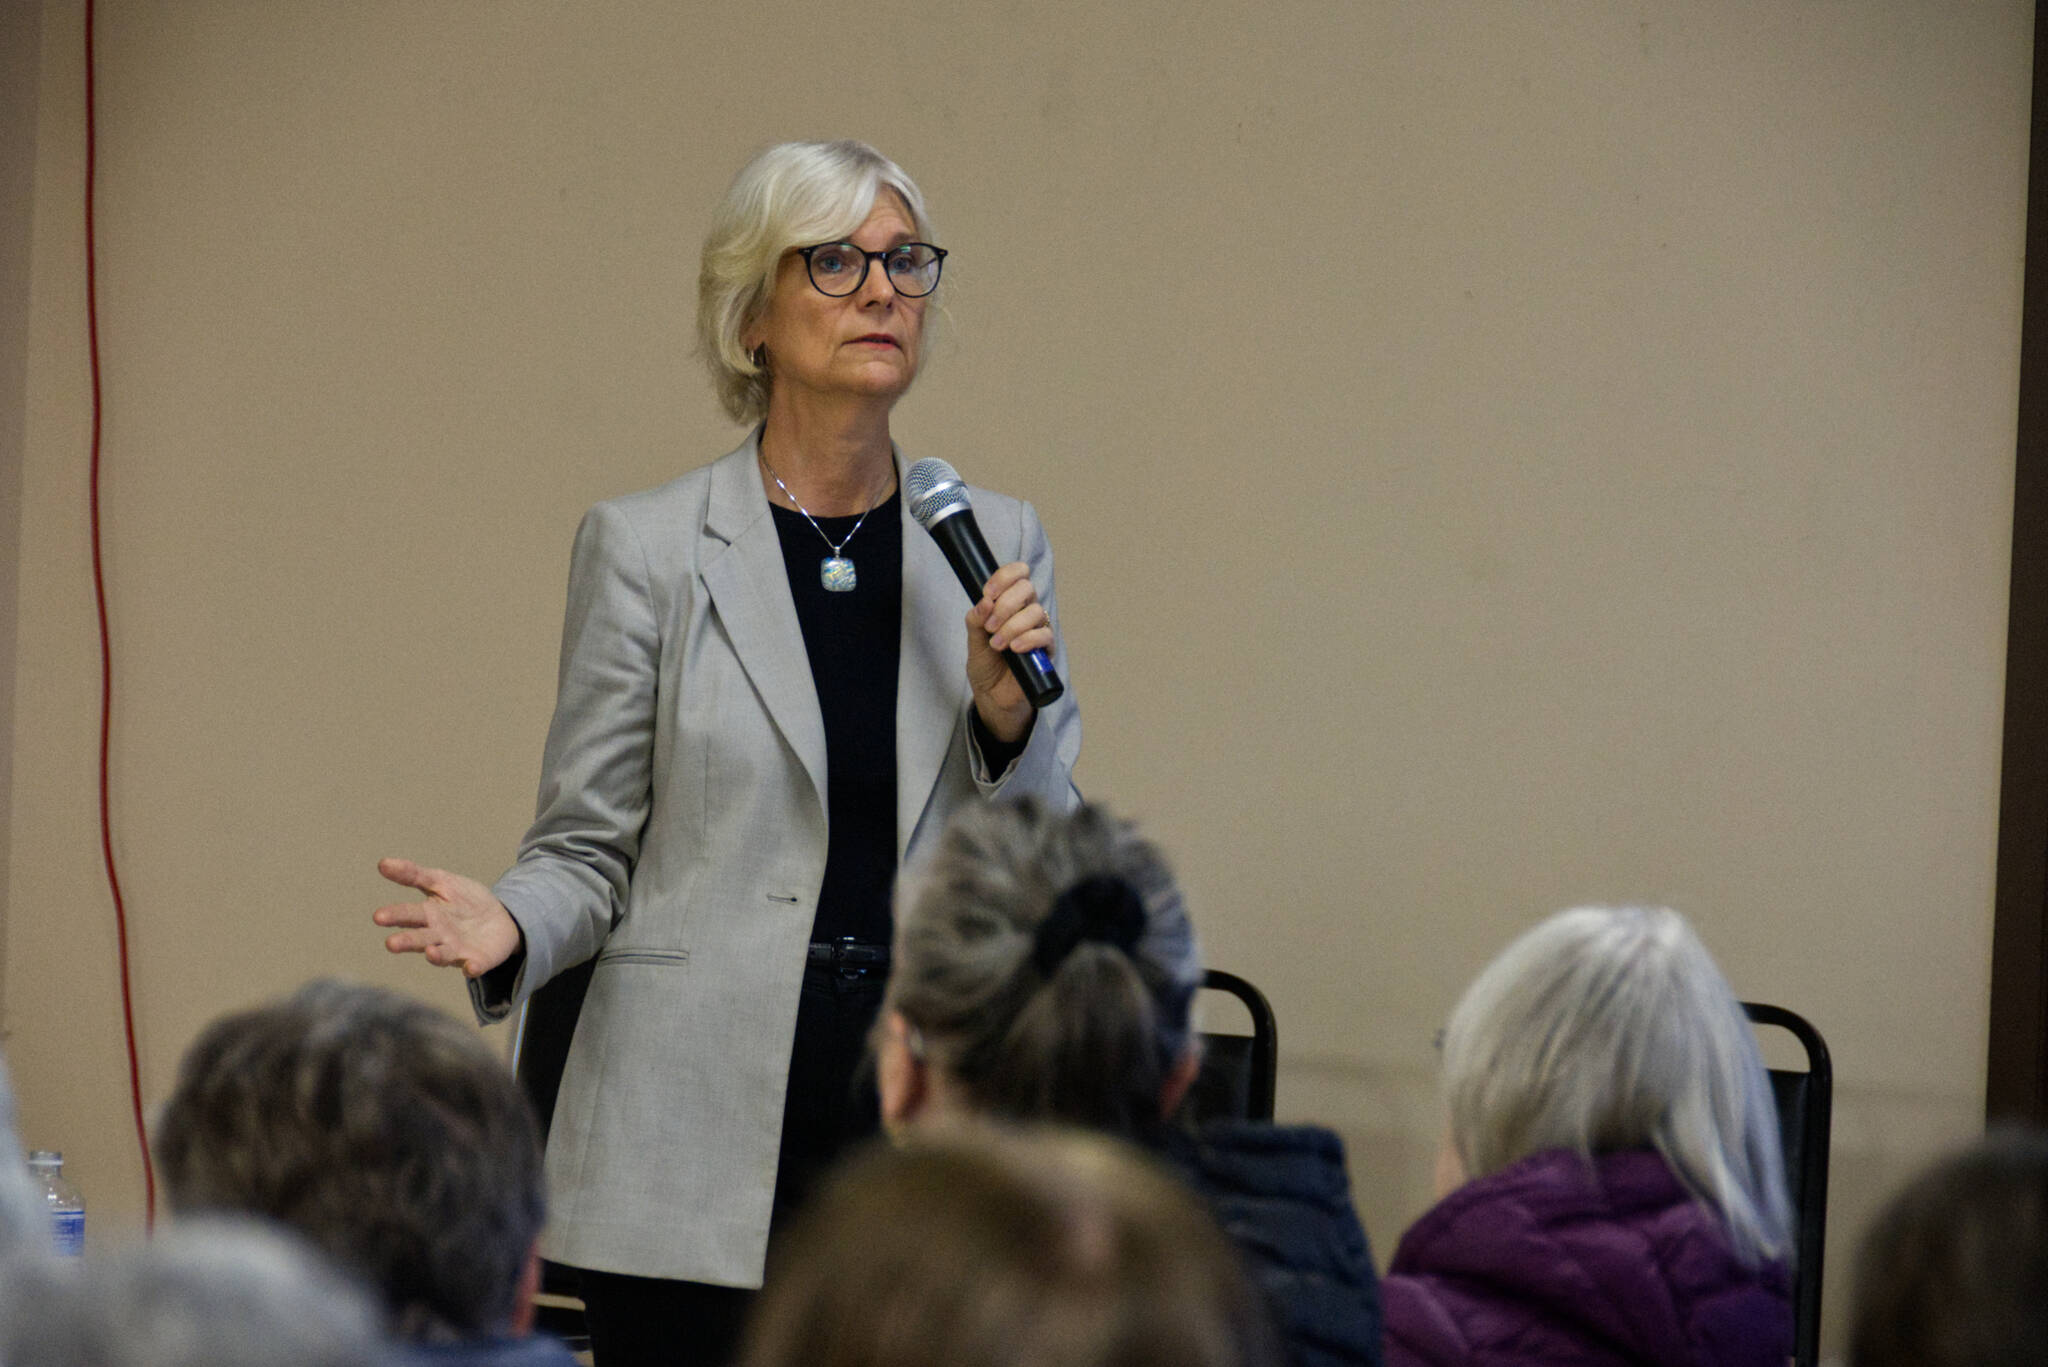 B.C. seniors advocate Isobel Mackenzie presents to senior citizens and local residents during a Town Hall at the Senior Centre in Cranbrook on Wednesday, Feb. 15. Trevor Crawley photo.